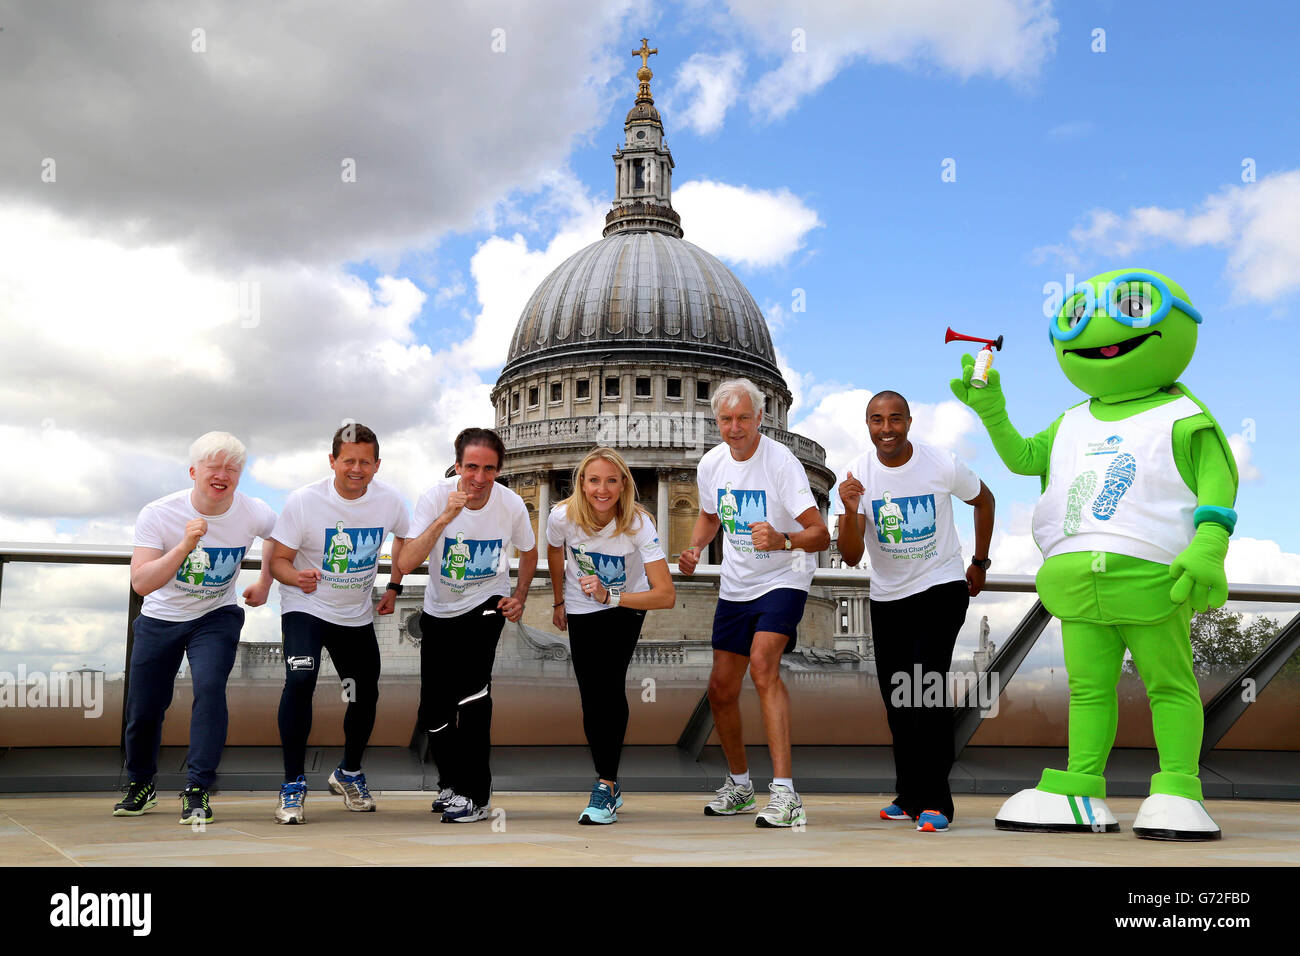 Richard Holmes, CEO Europe at Standard Chartered Bank (2nd right) with the 10th anniversary Standard Chartered Great City Race ambassadors, (left to right) Jack Roughan, Mike Bushell, Noel Thatcher, Paula Radcliffe, Colin Jackson and Seeing is Believing's mascot Sir SiB on the Rooftop Terrace at One New Change in London. Stock Photo